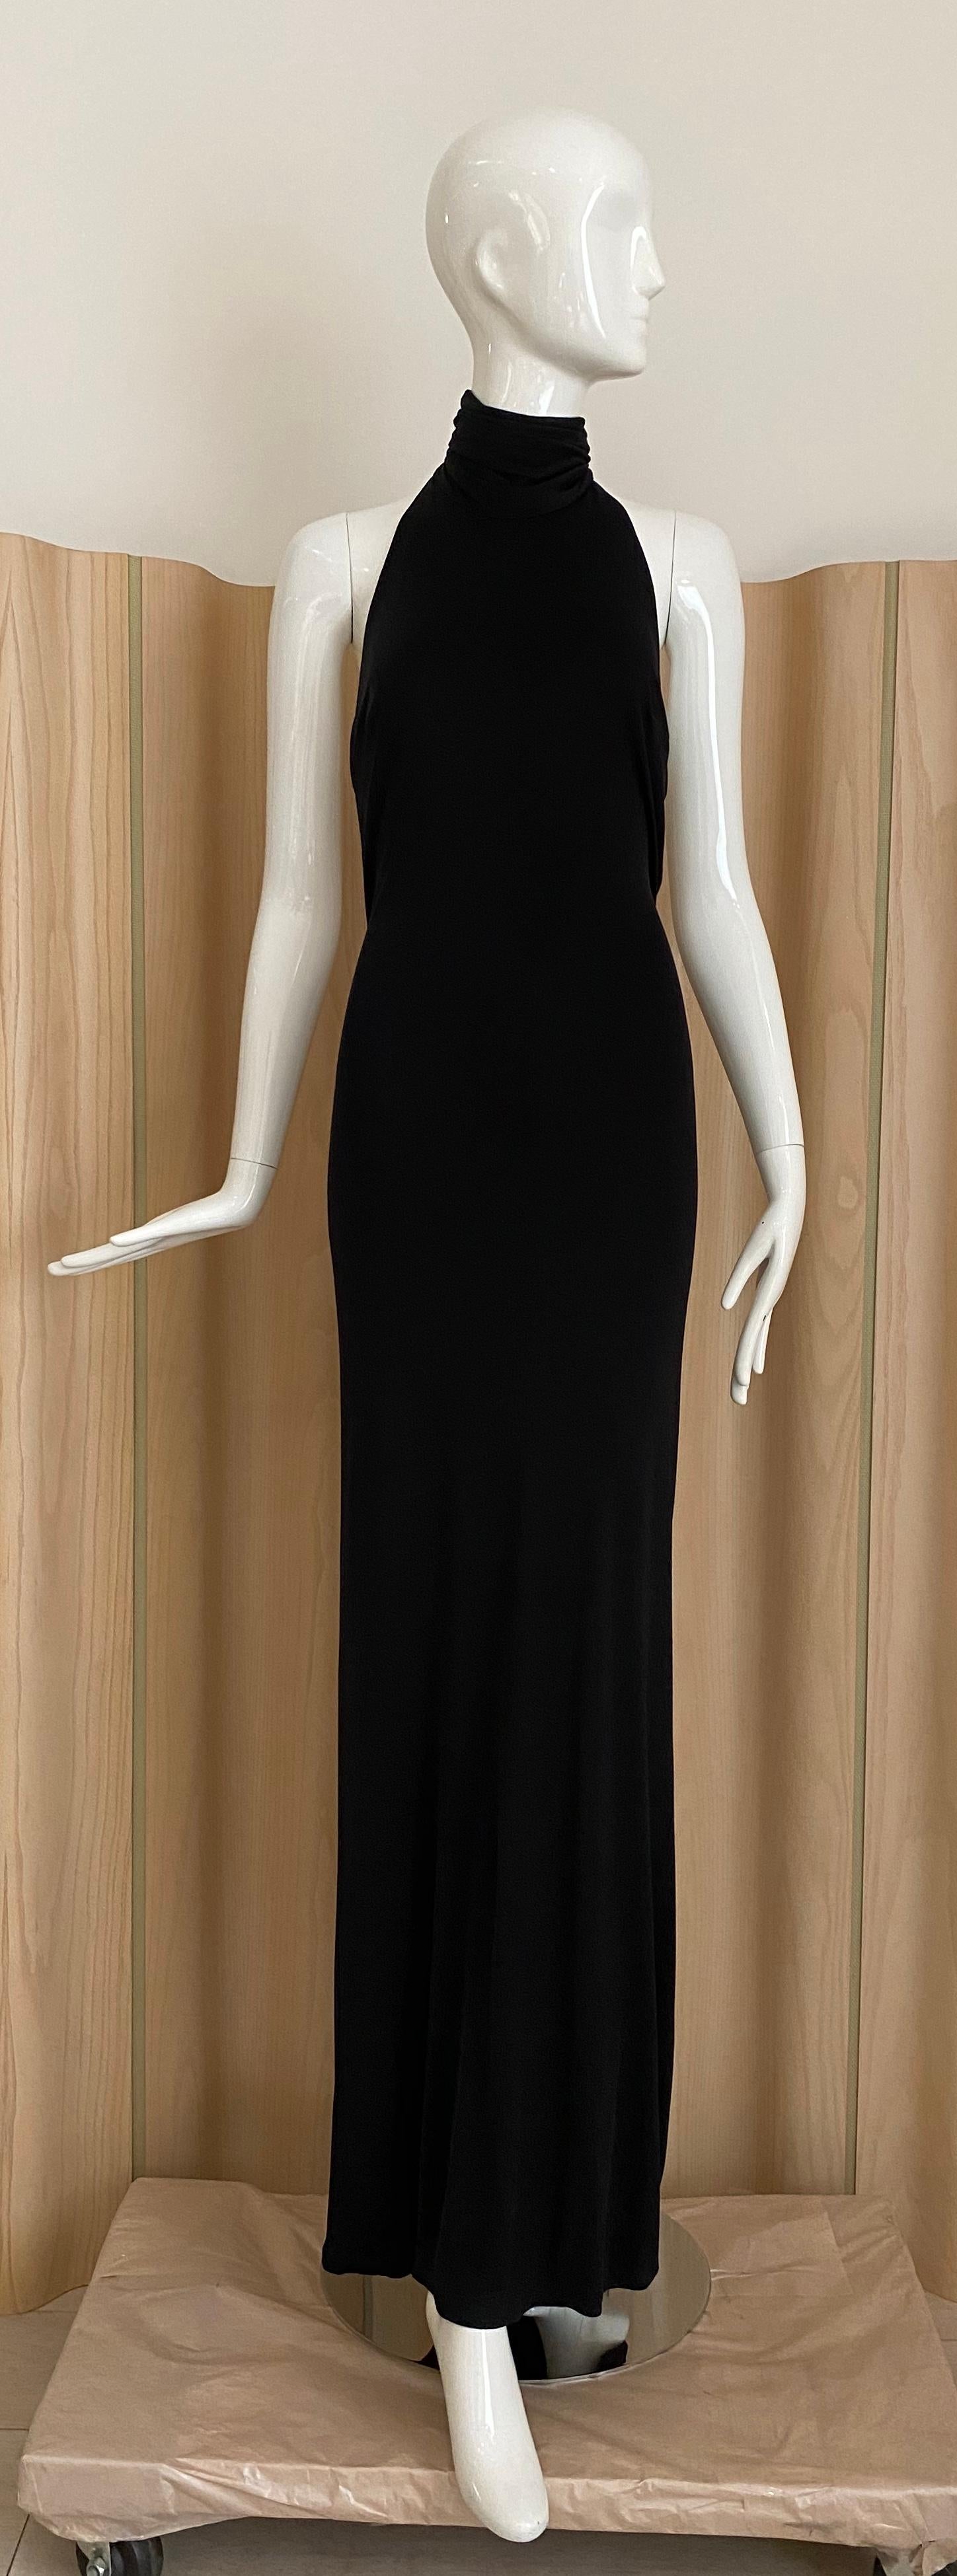 Vintage Gianni Versace Silk Jersey Gown with bare back. ( stretchy) 
label marked size : 40it
Bust : stretch up to 33” /waist : can stretch up to 28” / Hip stretch up to 40” / dress length approx 57” 